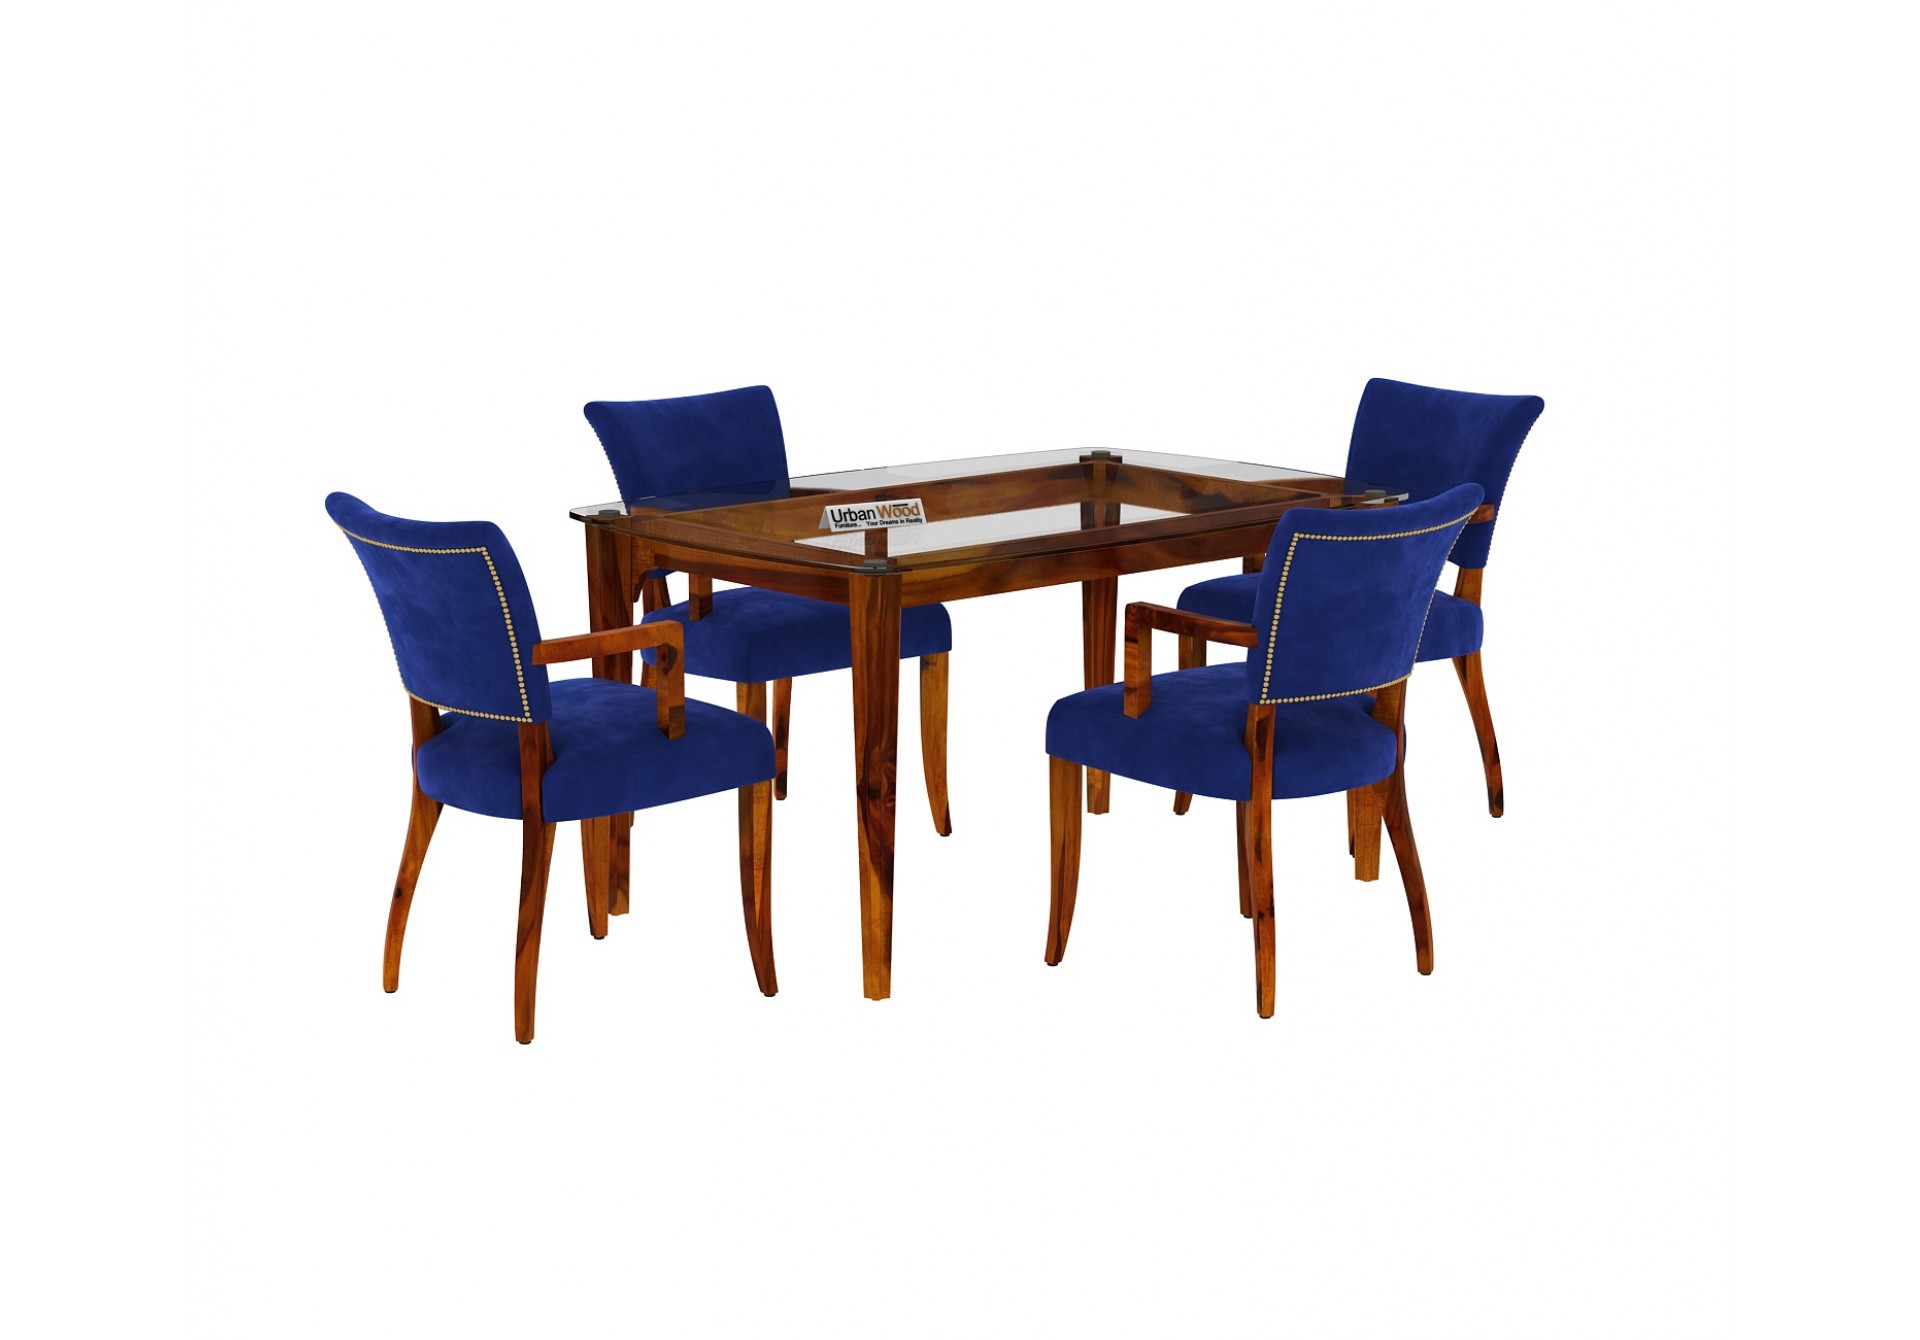 Quipo 4-Seater Dining Table Set (With Arms) (Honey Finish)